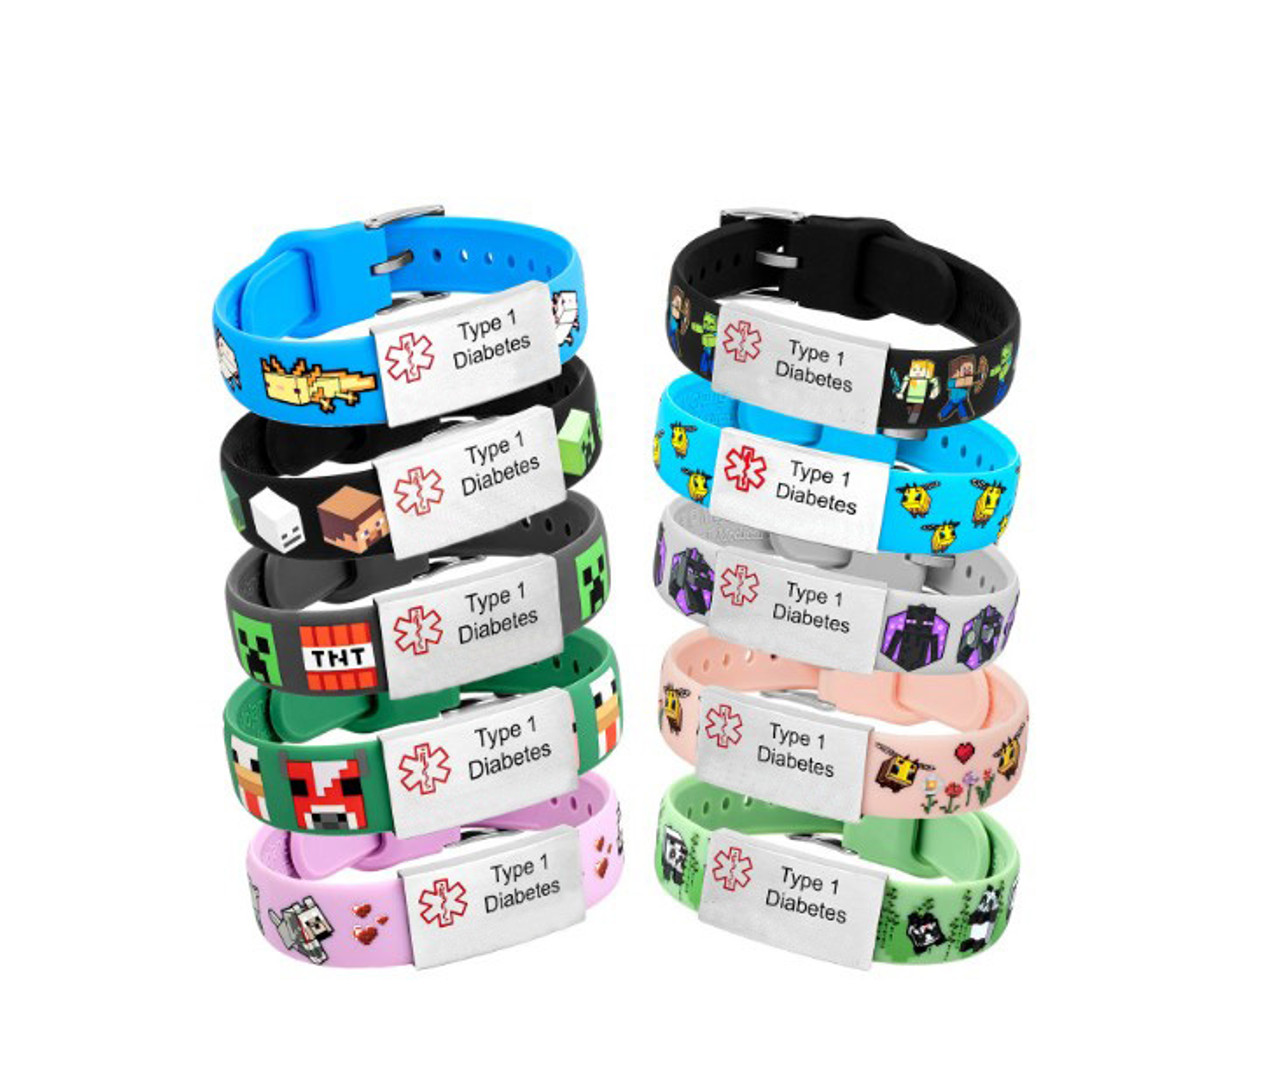 Minecraft Medical ID Bracelets: Combining Safety and Fun for Kids and Adults